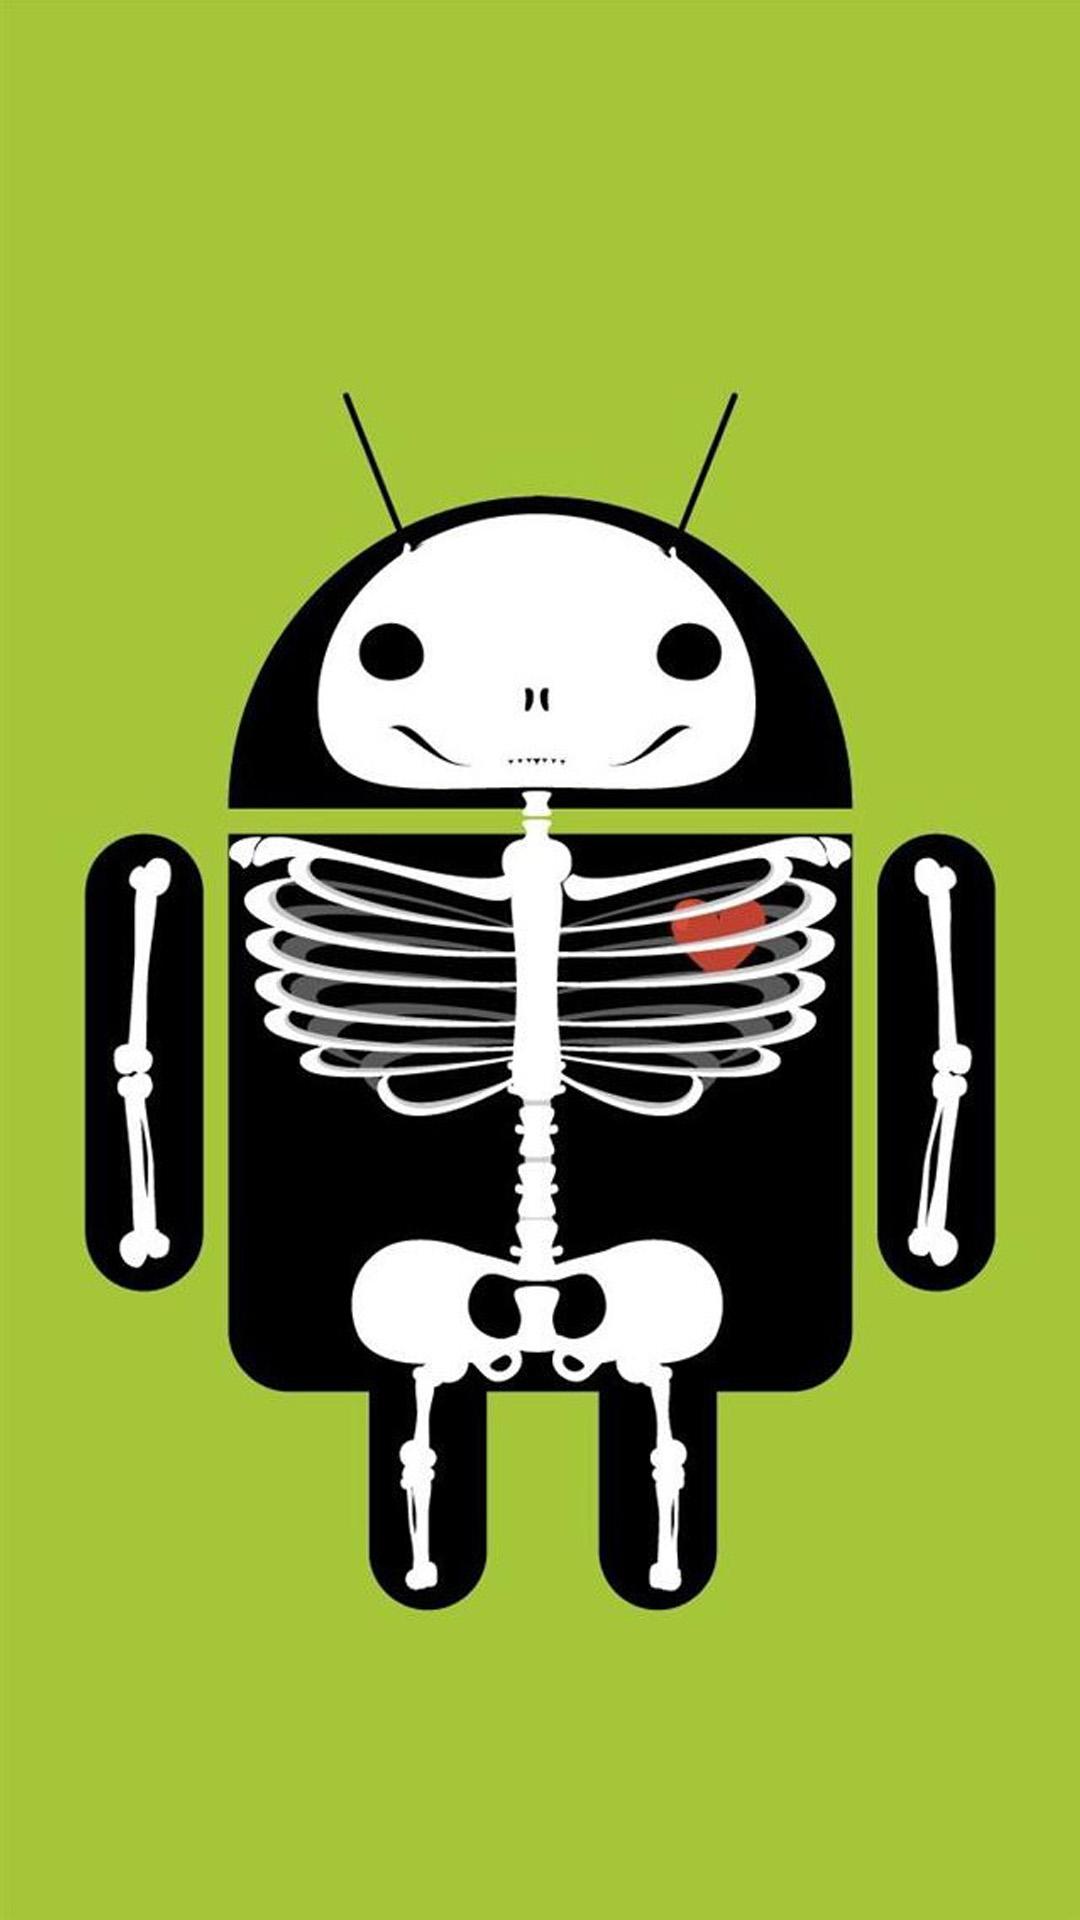 Funny Android htc one wallpaper, free and easy to download